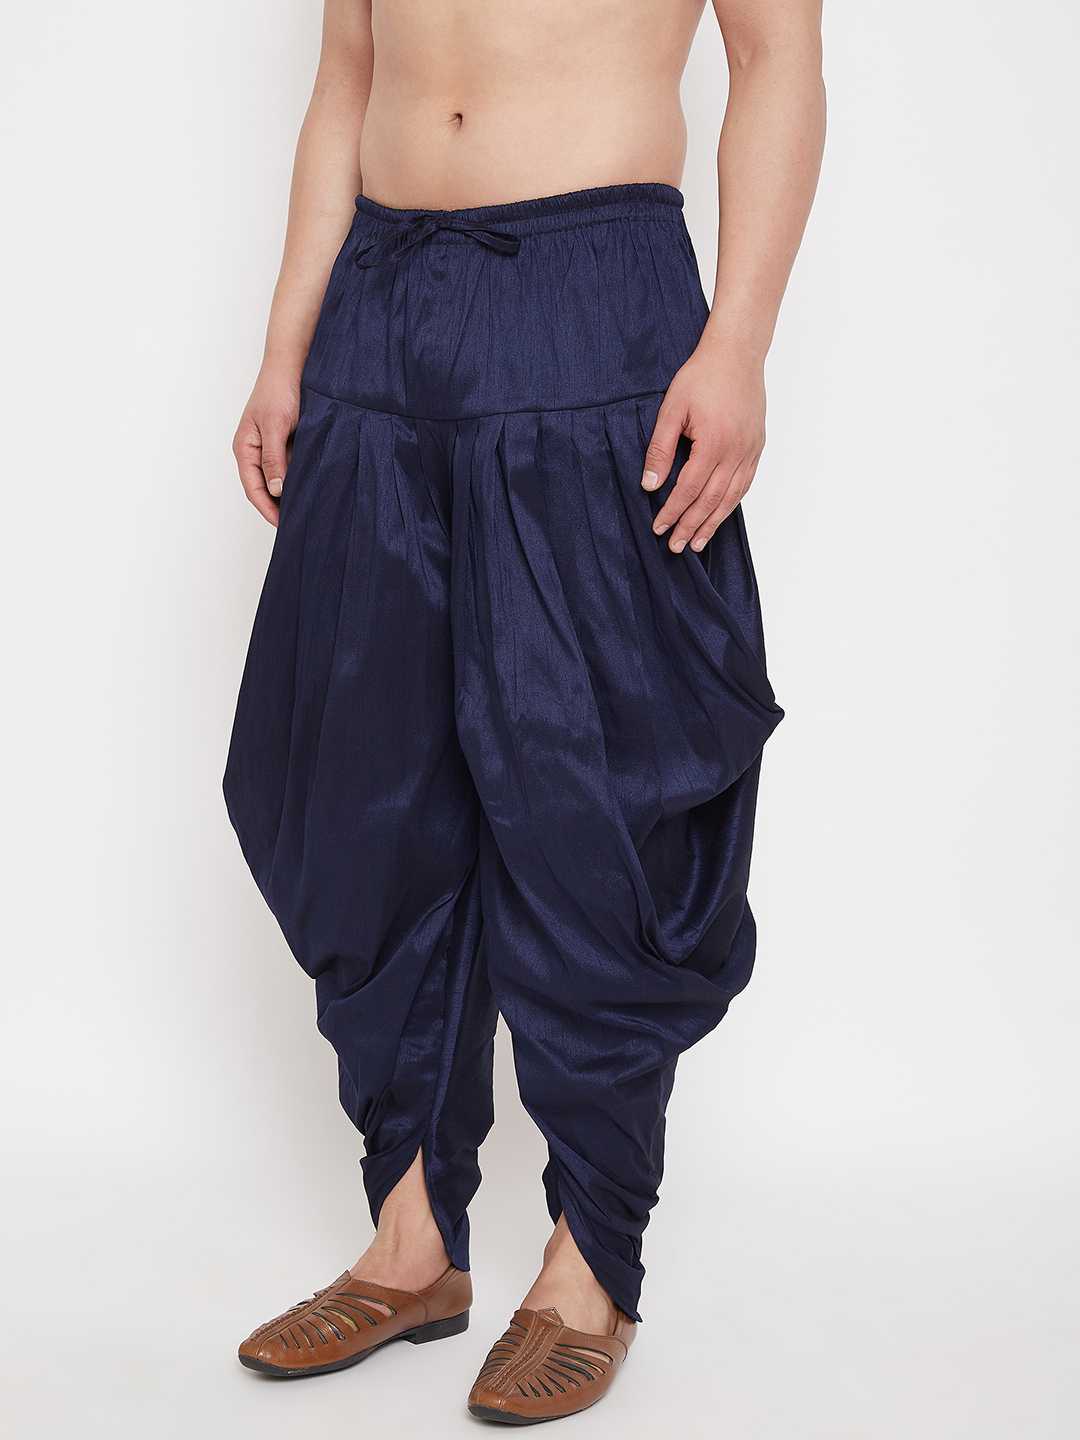 Pasha India Pleated Pants Navy Blue Dhoti Pants, 32.0 at Rs 2500/piece in  Jaipur